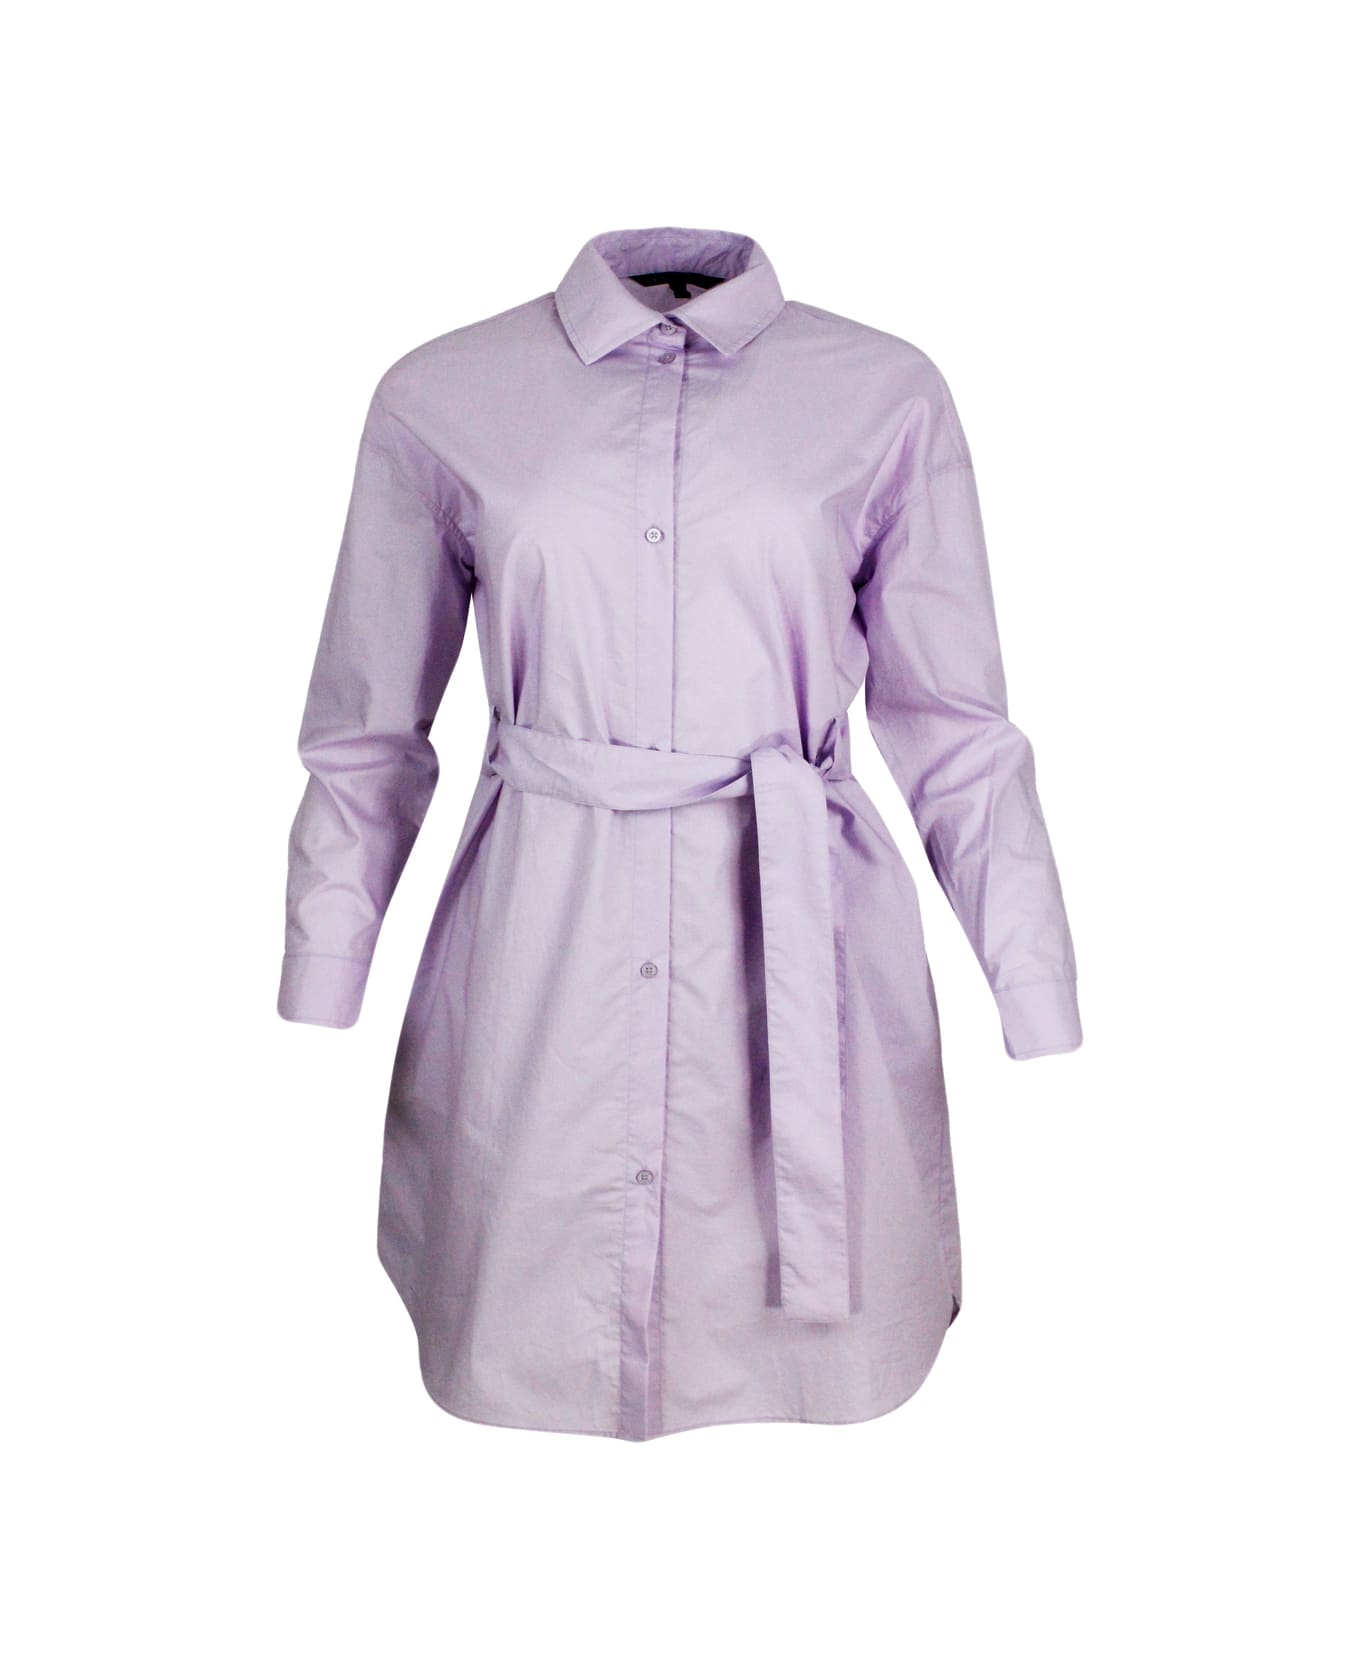 Armani Collezioni Dress Made Of Soft Cotton With Long Sleeves, With Button Closure On The Front And Belt. - Pink